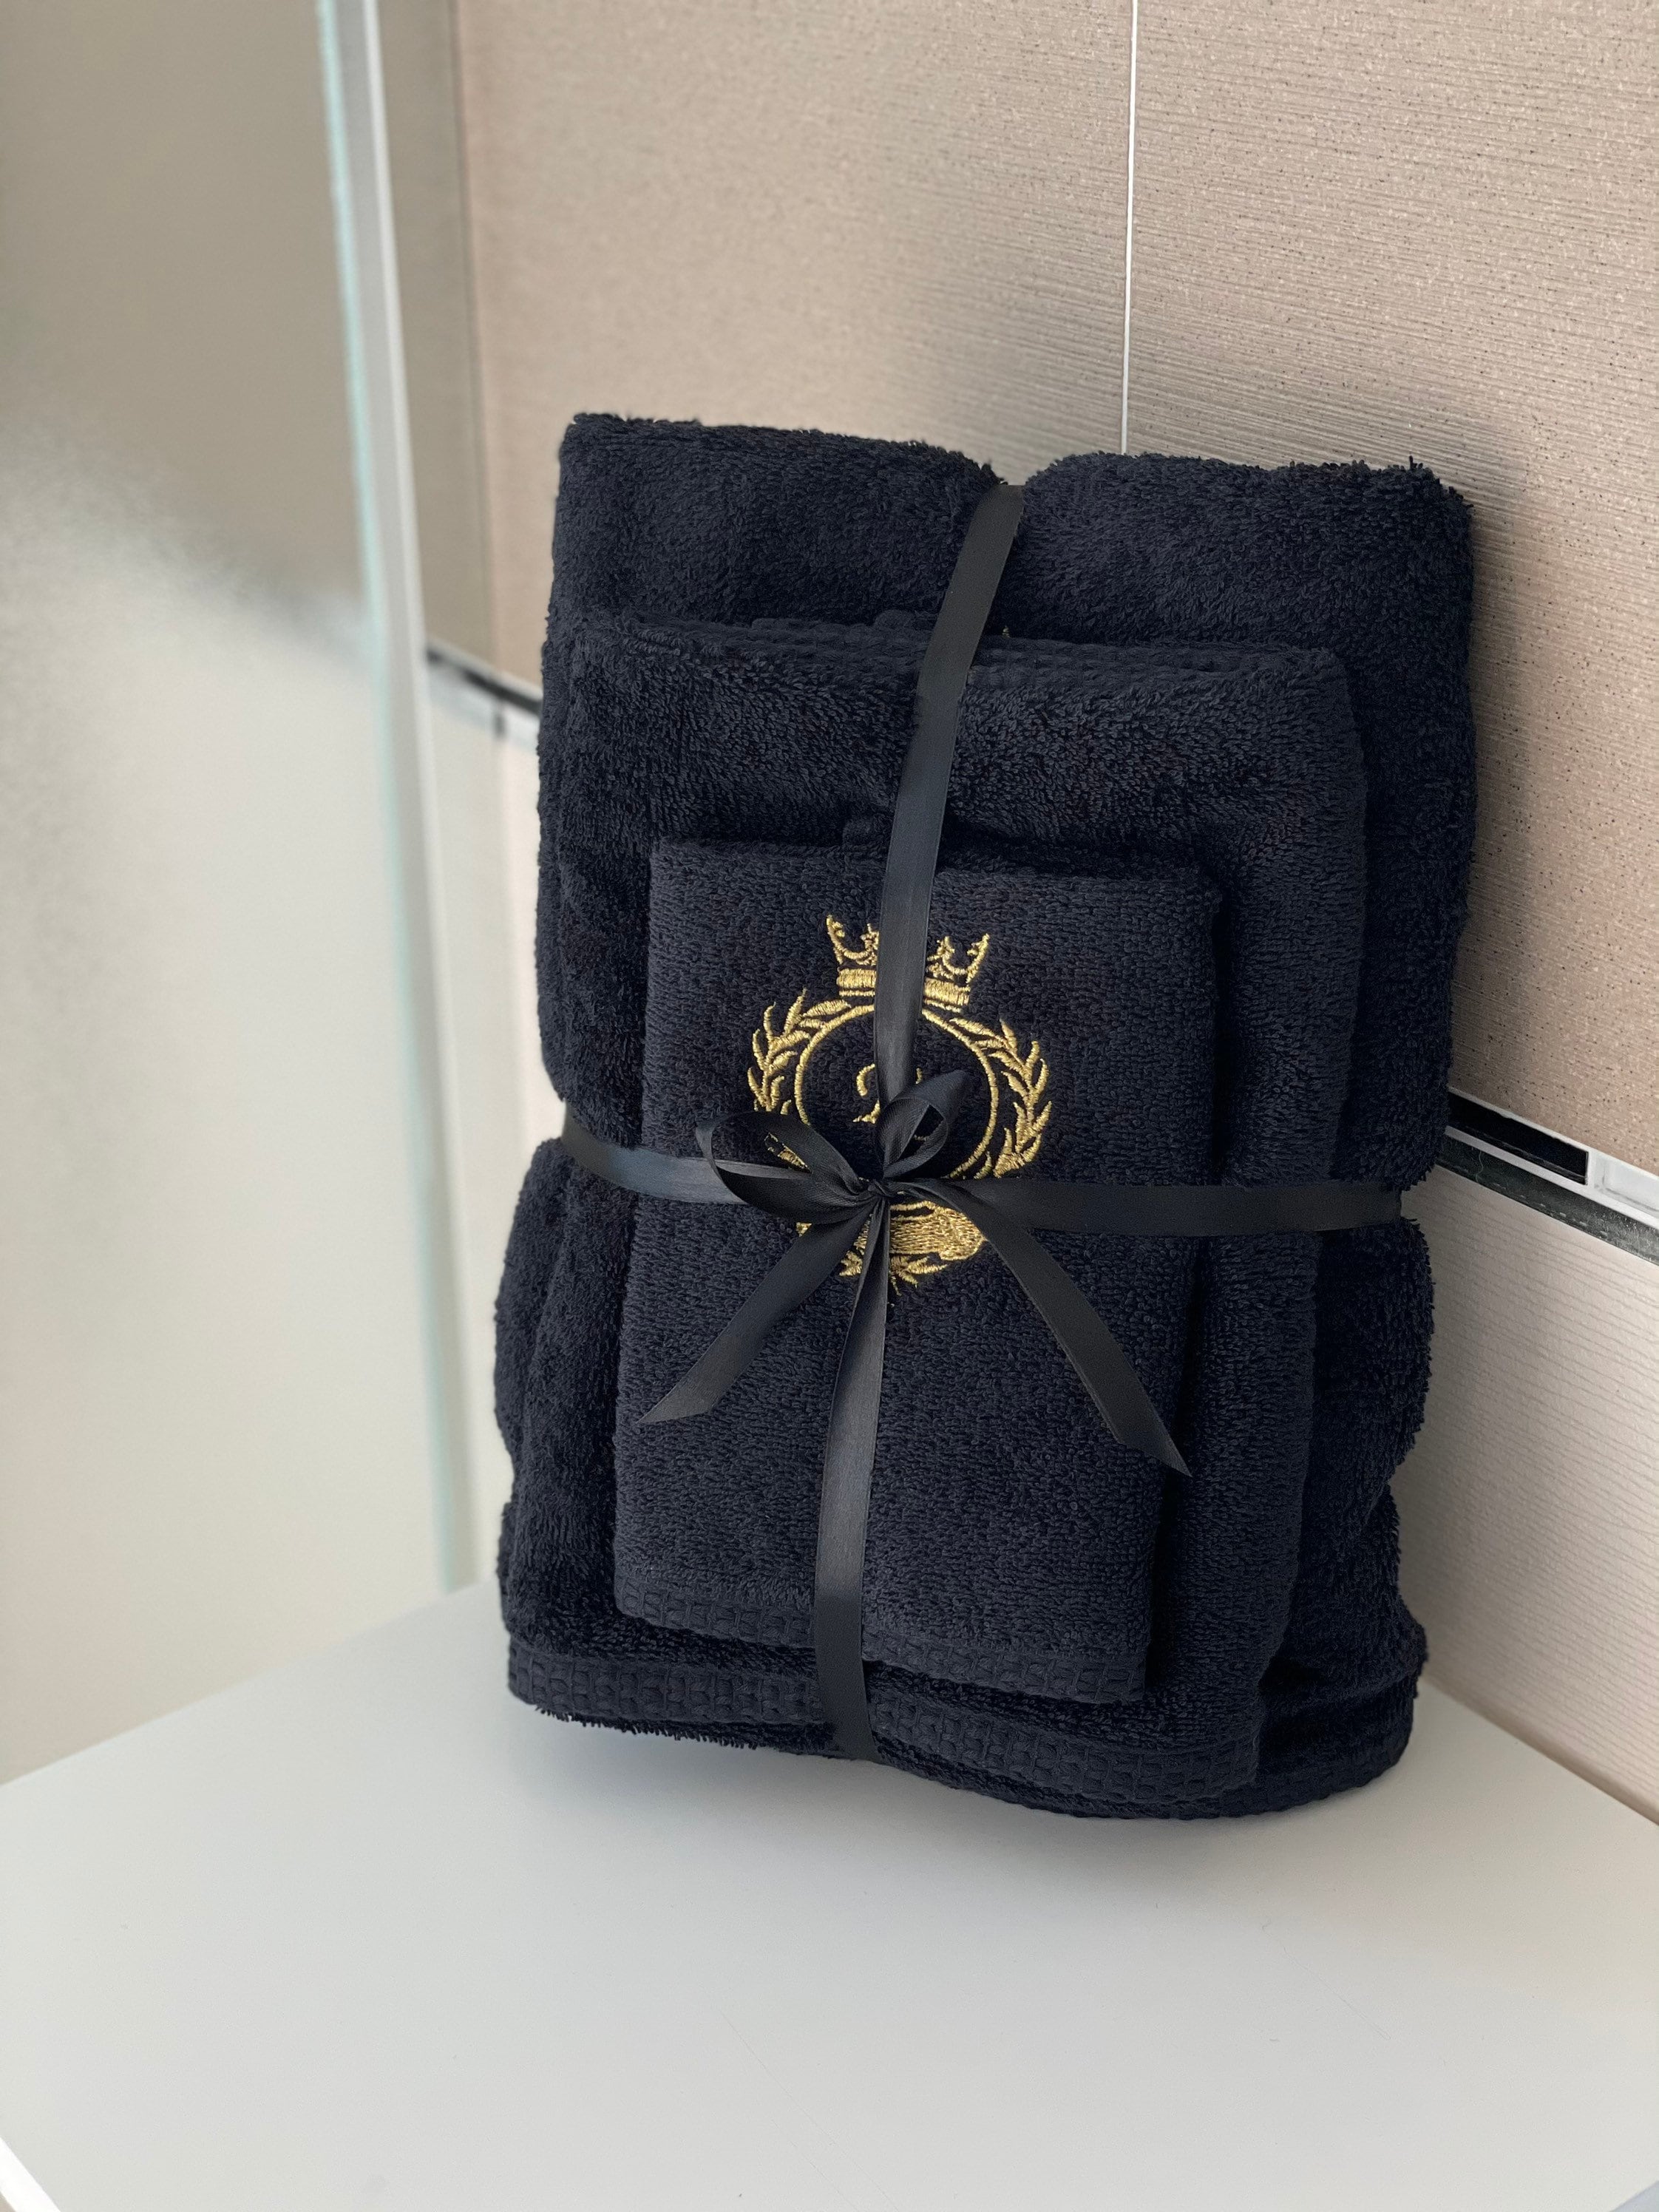 Black Bathroom Towel Set, Gold Antique Crown Custom Embroidery, Monogram  Hand Towels, Personalise, Personalize 